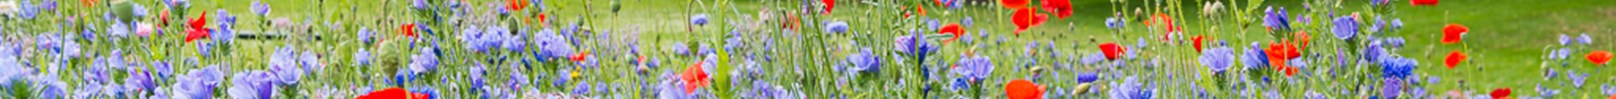 close up of red and blue wild flowers with grass area and trees beyond